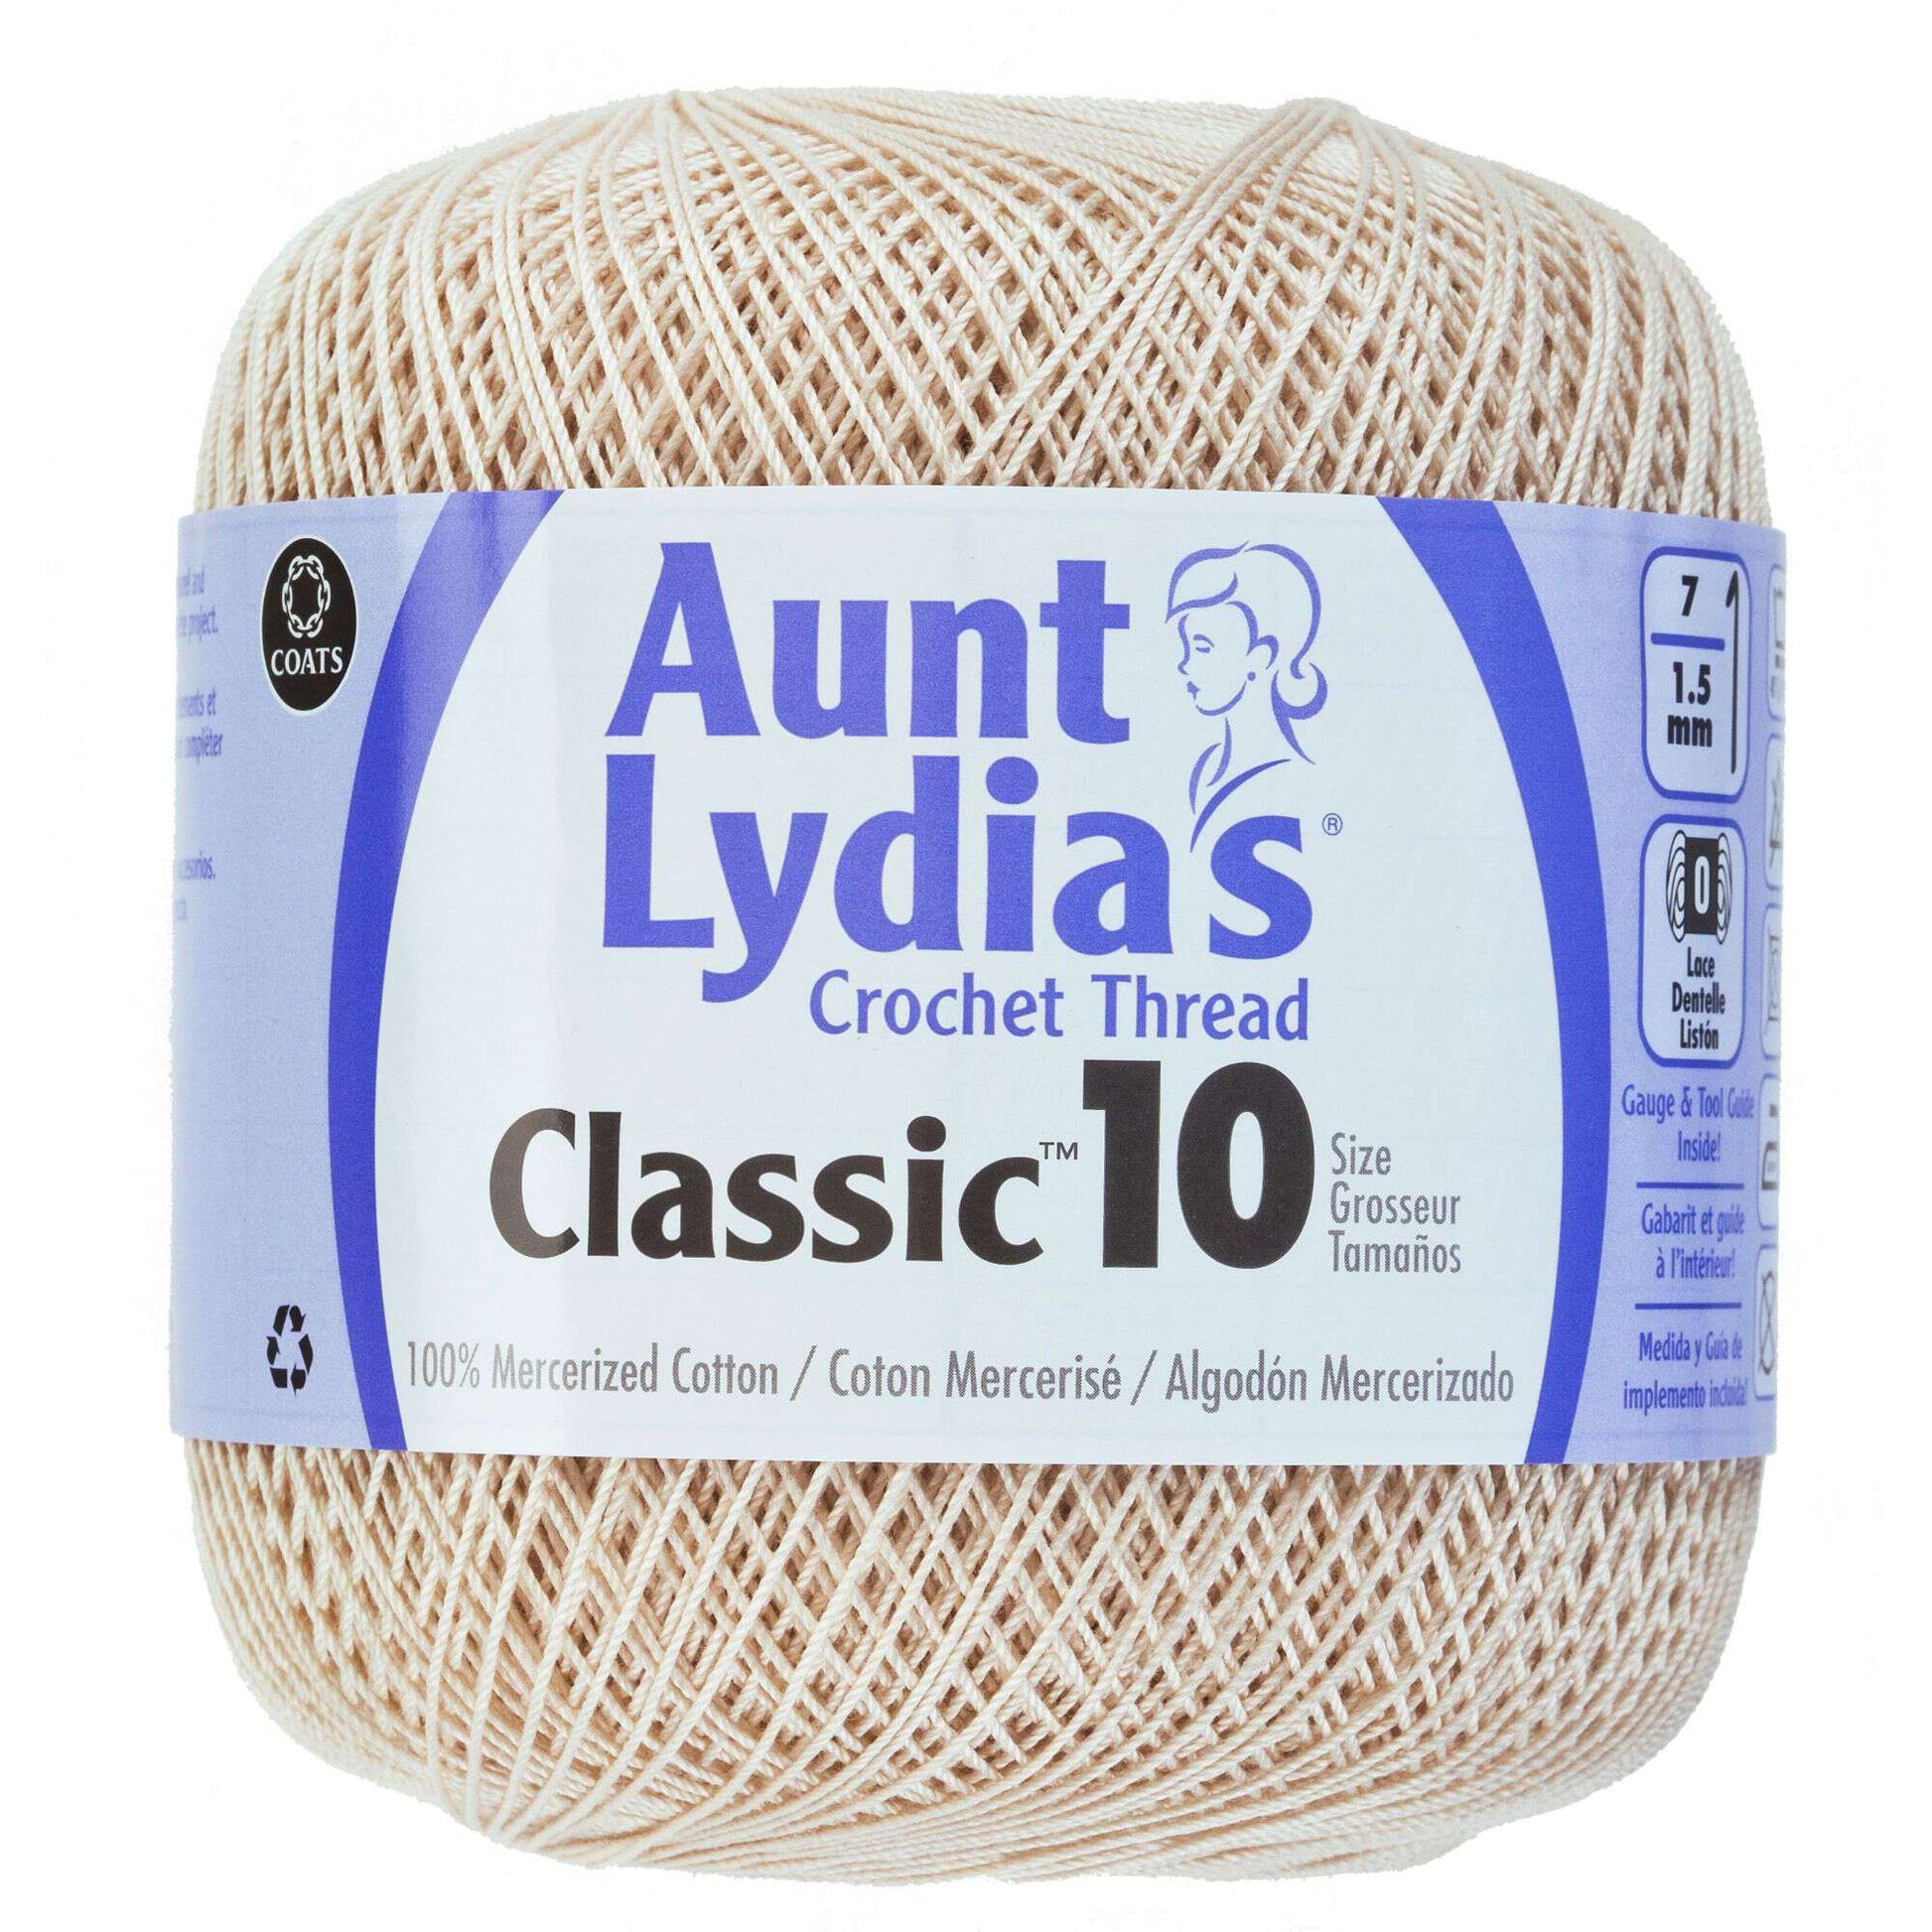 Aunt Lydia's Classic Crochet Thread Size 10 Natural